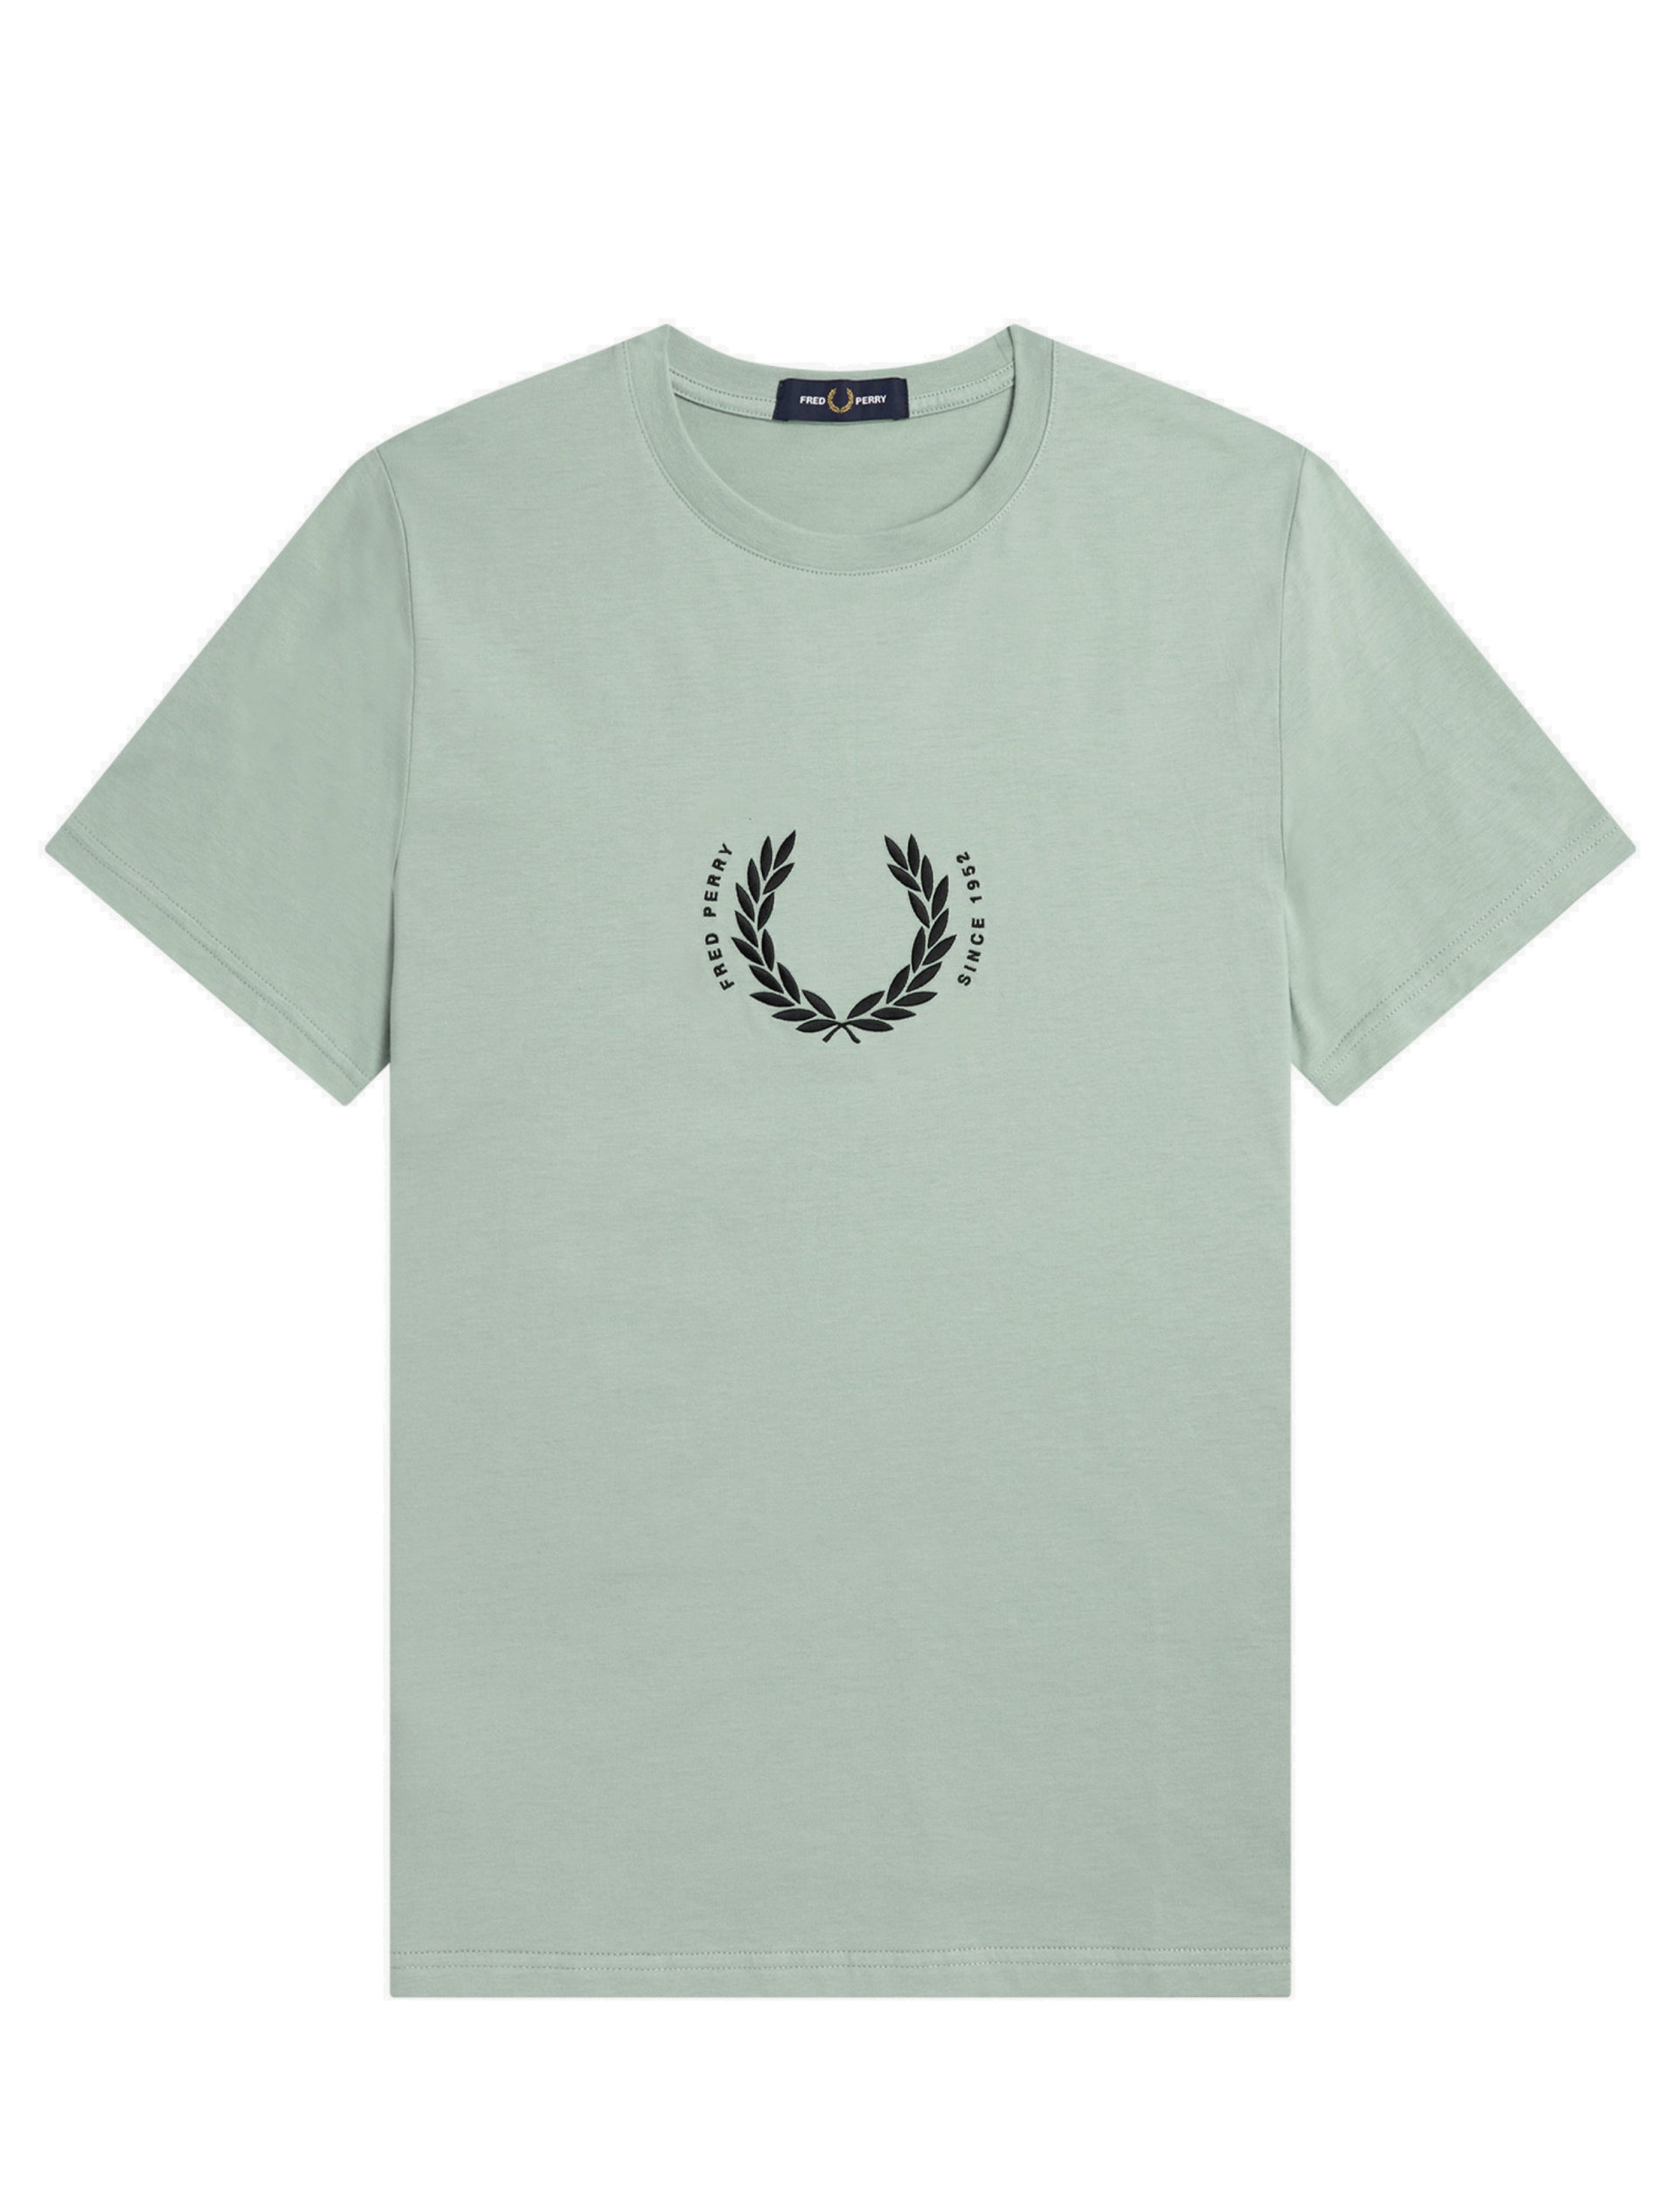 Fred Perry T-shirt blå / 959 silver blue